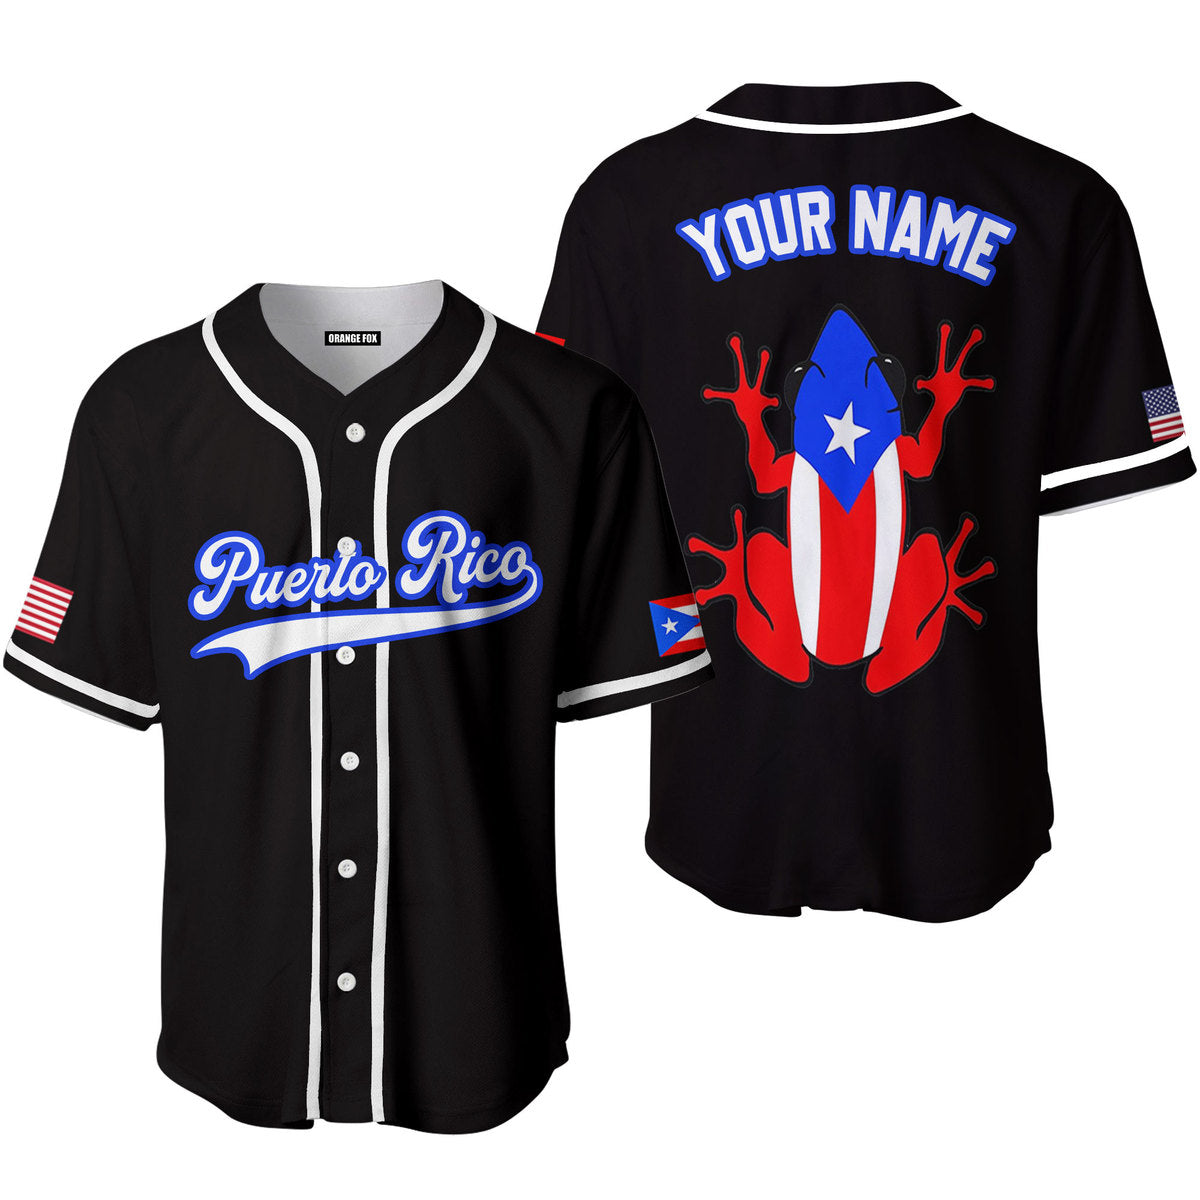 Personalized Puerto Rico Frog Black White Blue Baseball Tee Jersey